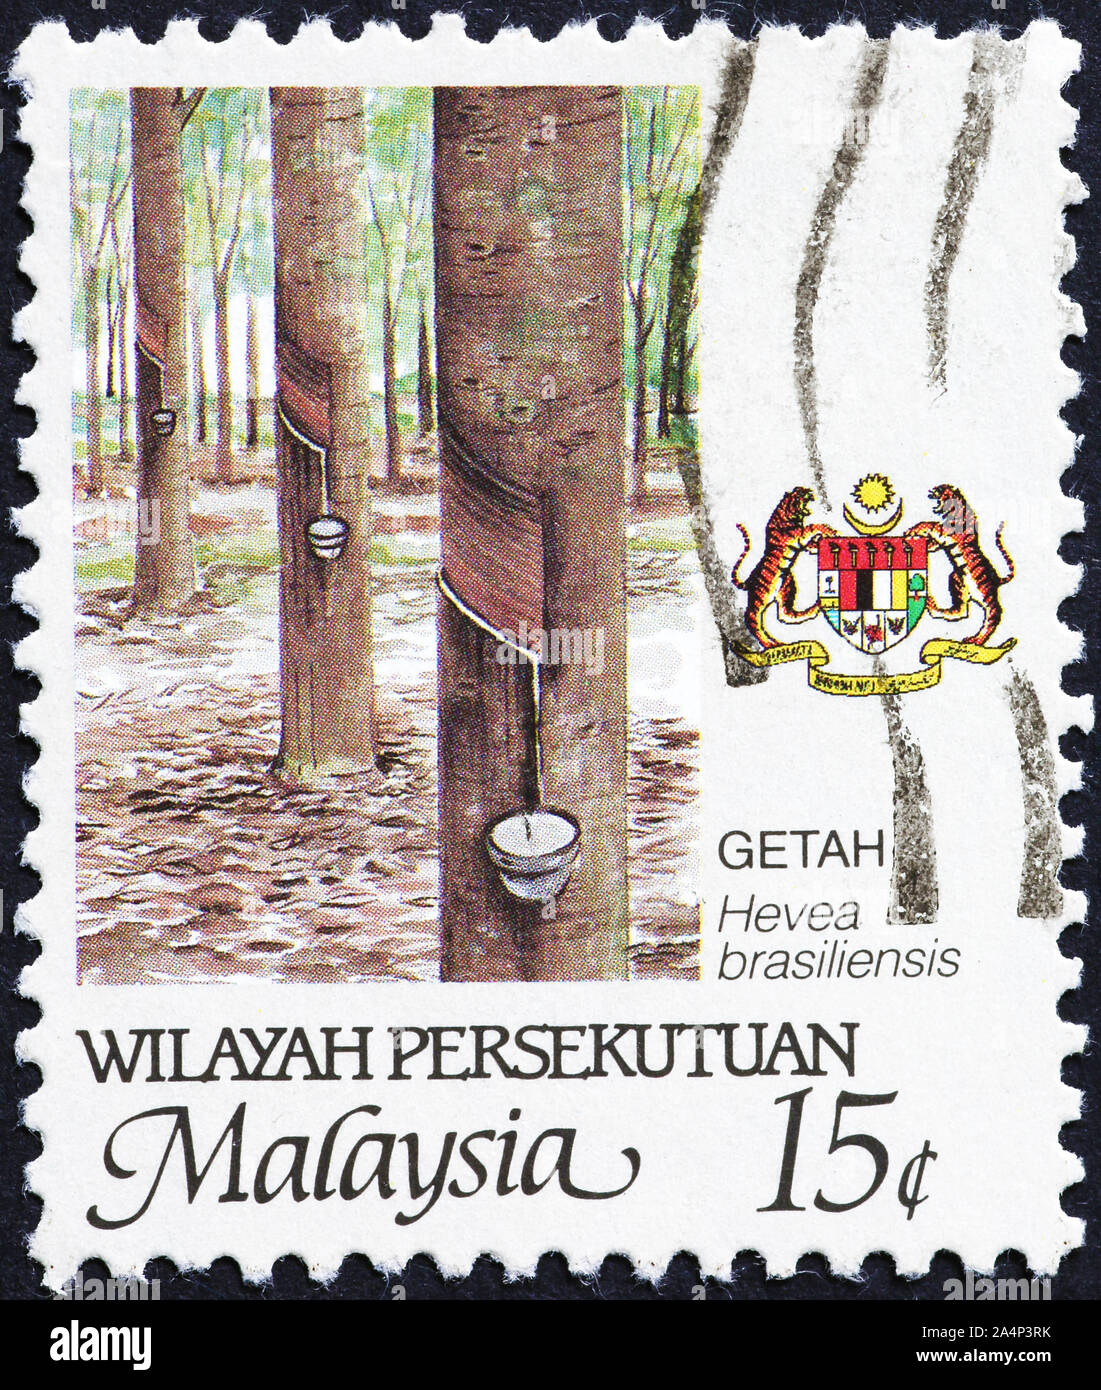 Latex collection from rubber trees on malaysian stamp Stock Photo